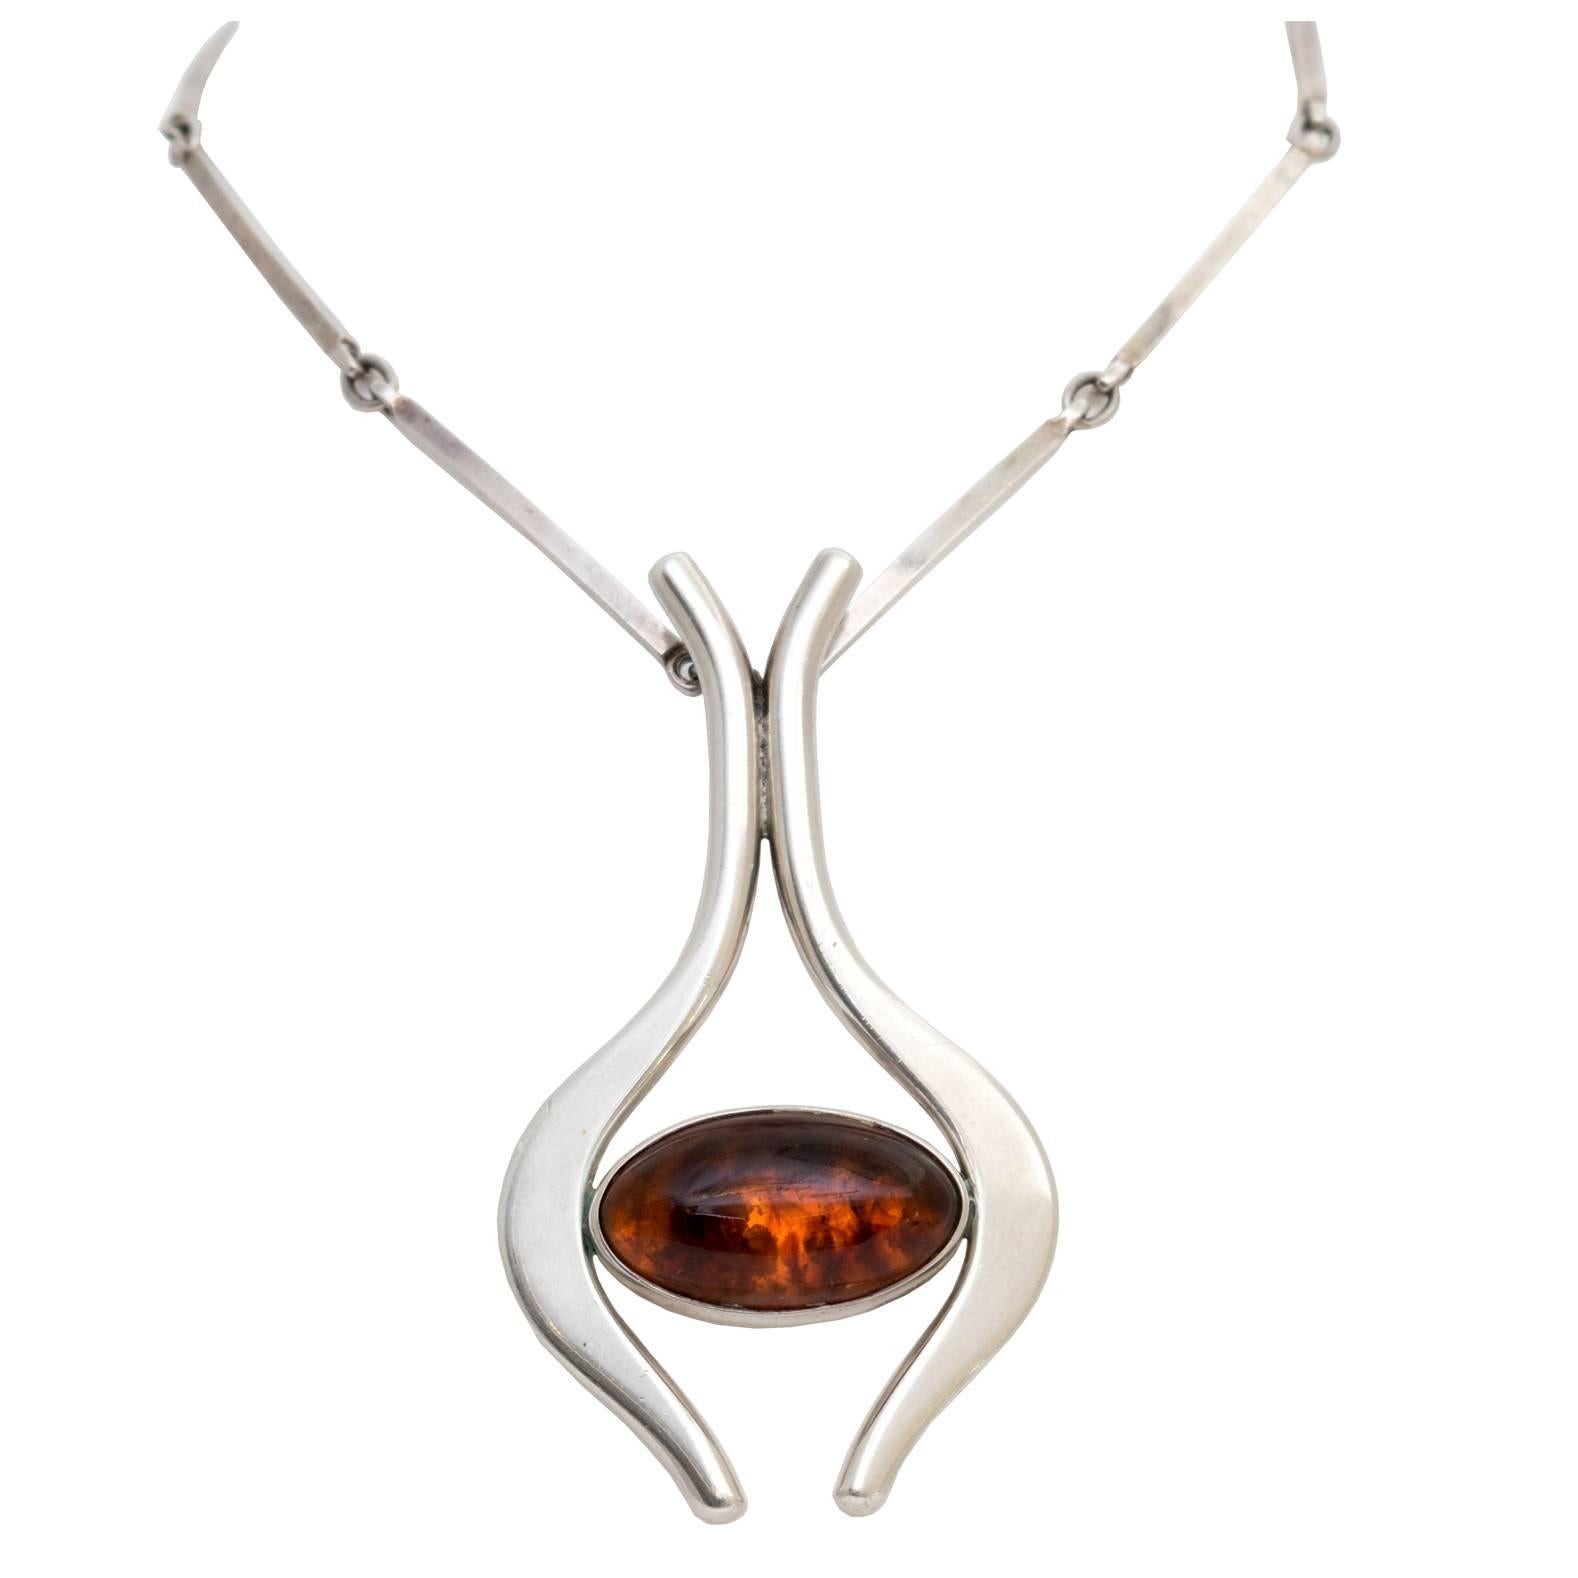 Scandinavian Modern Silver and Amber Necklace by Niels Erik From, Denmark